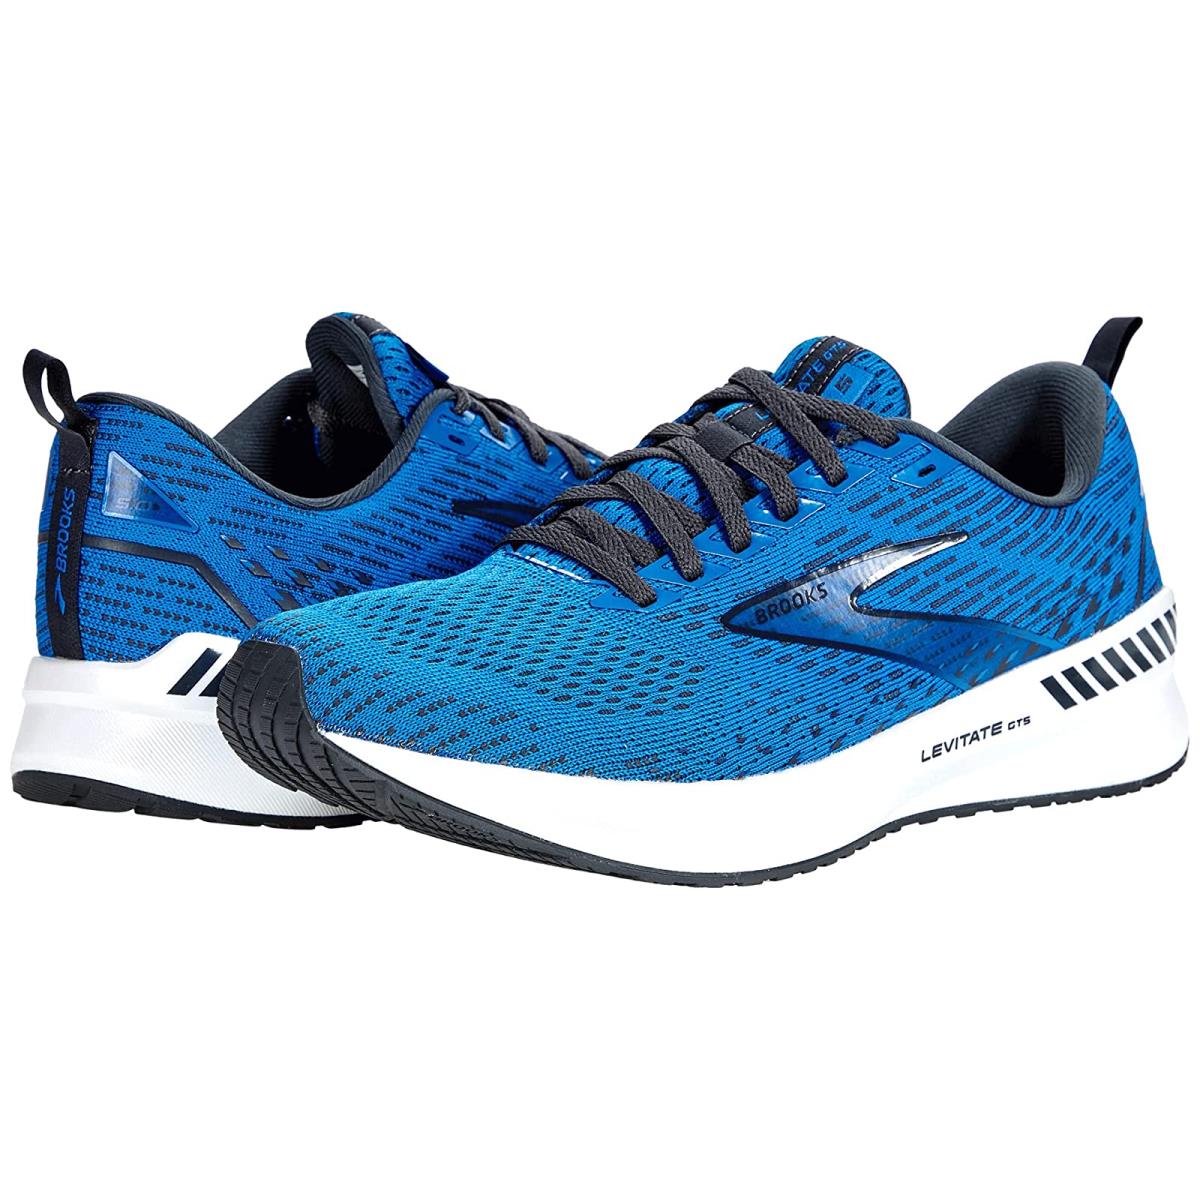 Man`s Sneakers Athletic Shoes Brooks Levitate Gts 5 Blue/India Ink/White